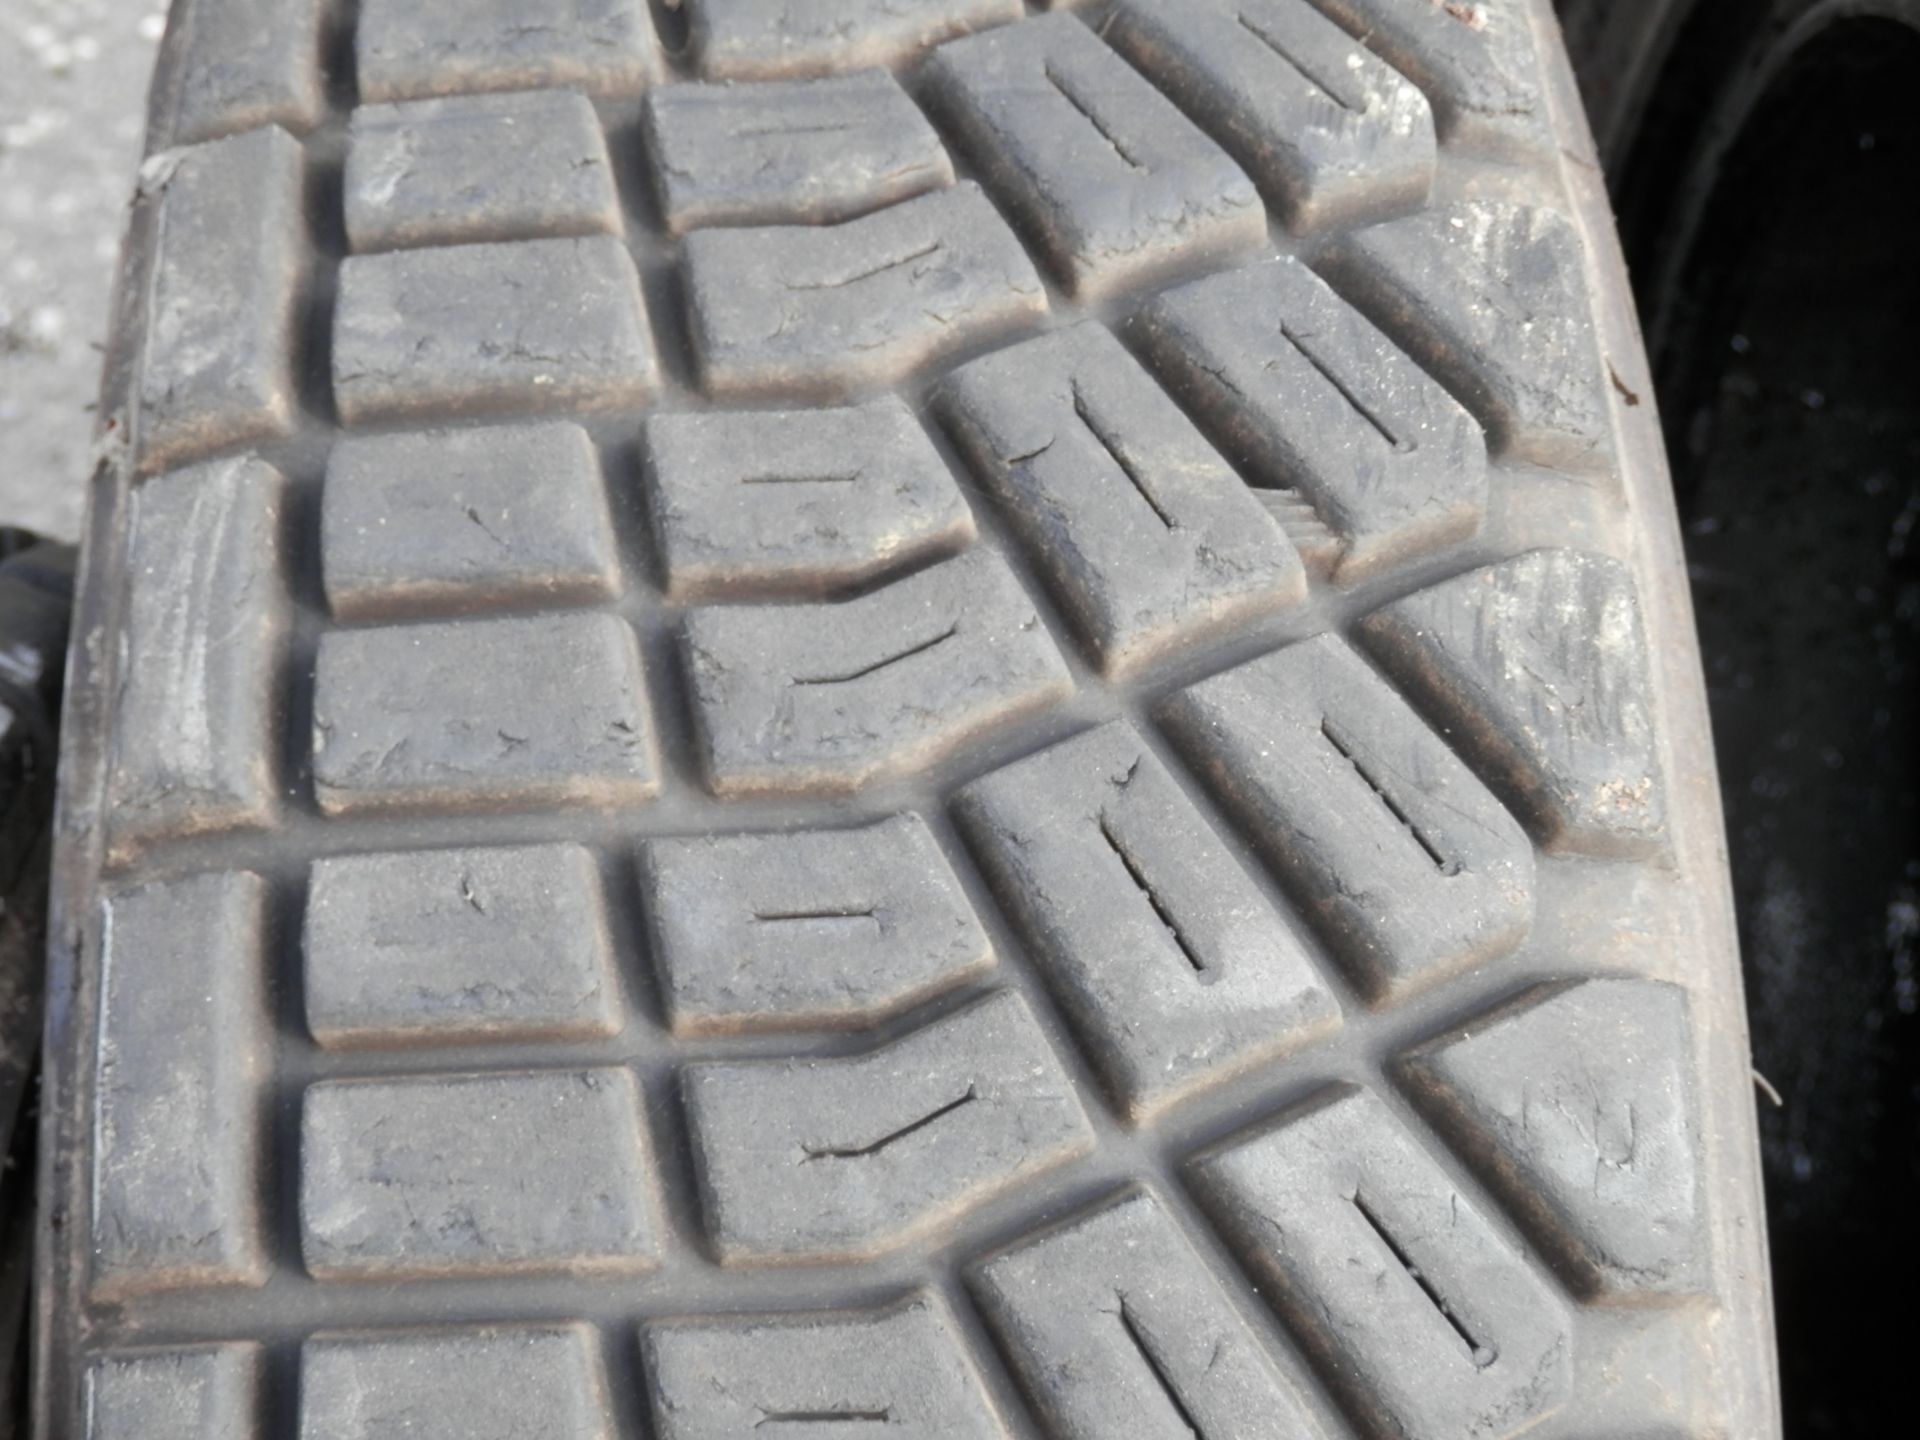 4 X DUNLOP DIREZZA RALLYE/OFF ROAD TYRES, 185/65/15 FROM A 2000 MITSUBISHI EVOLUTION. - Image 5 of 8